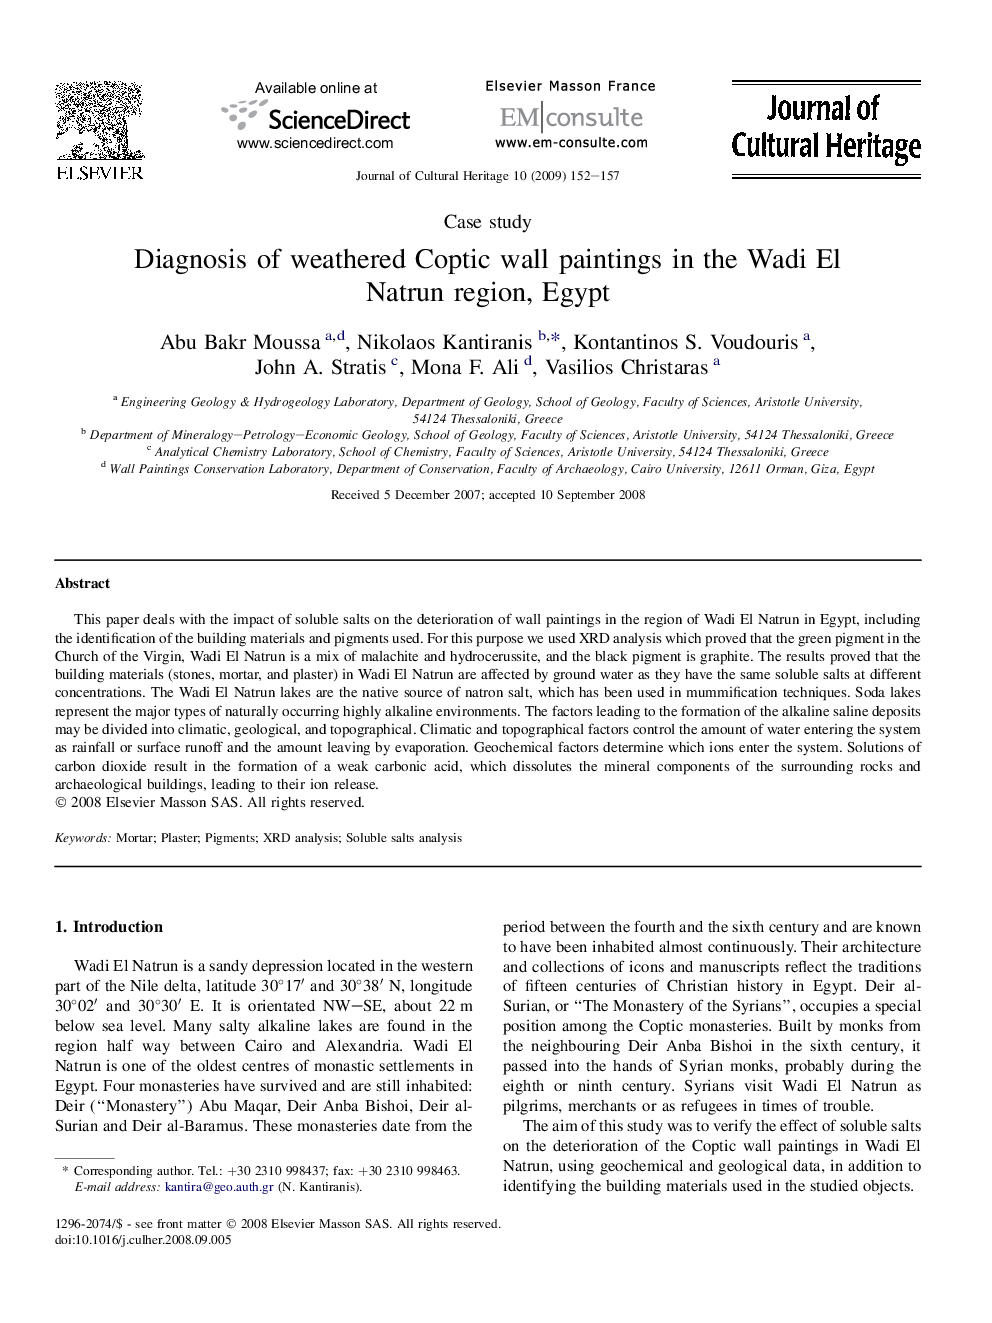 Diagnosis of weathered Coptic wall paintings in the Wadi El Natrun region, Egypt